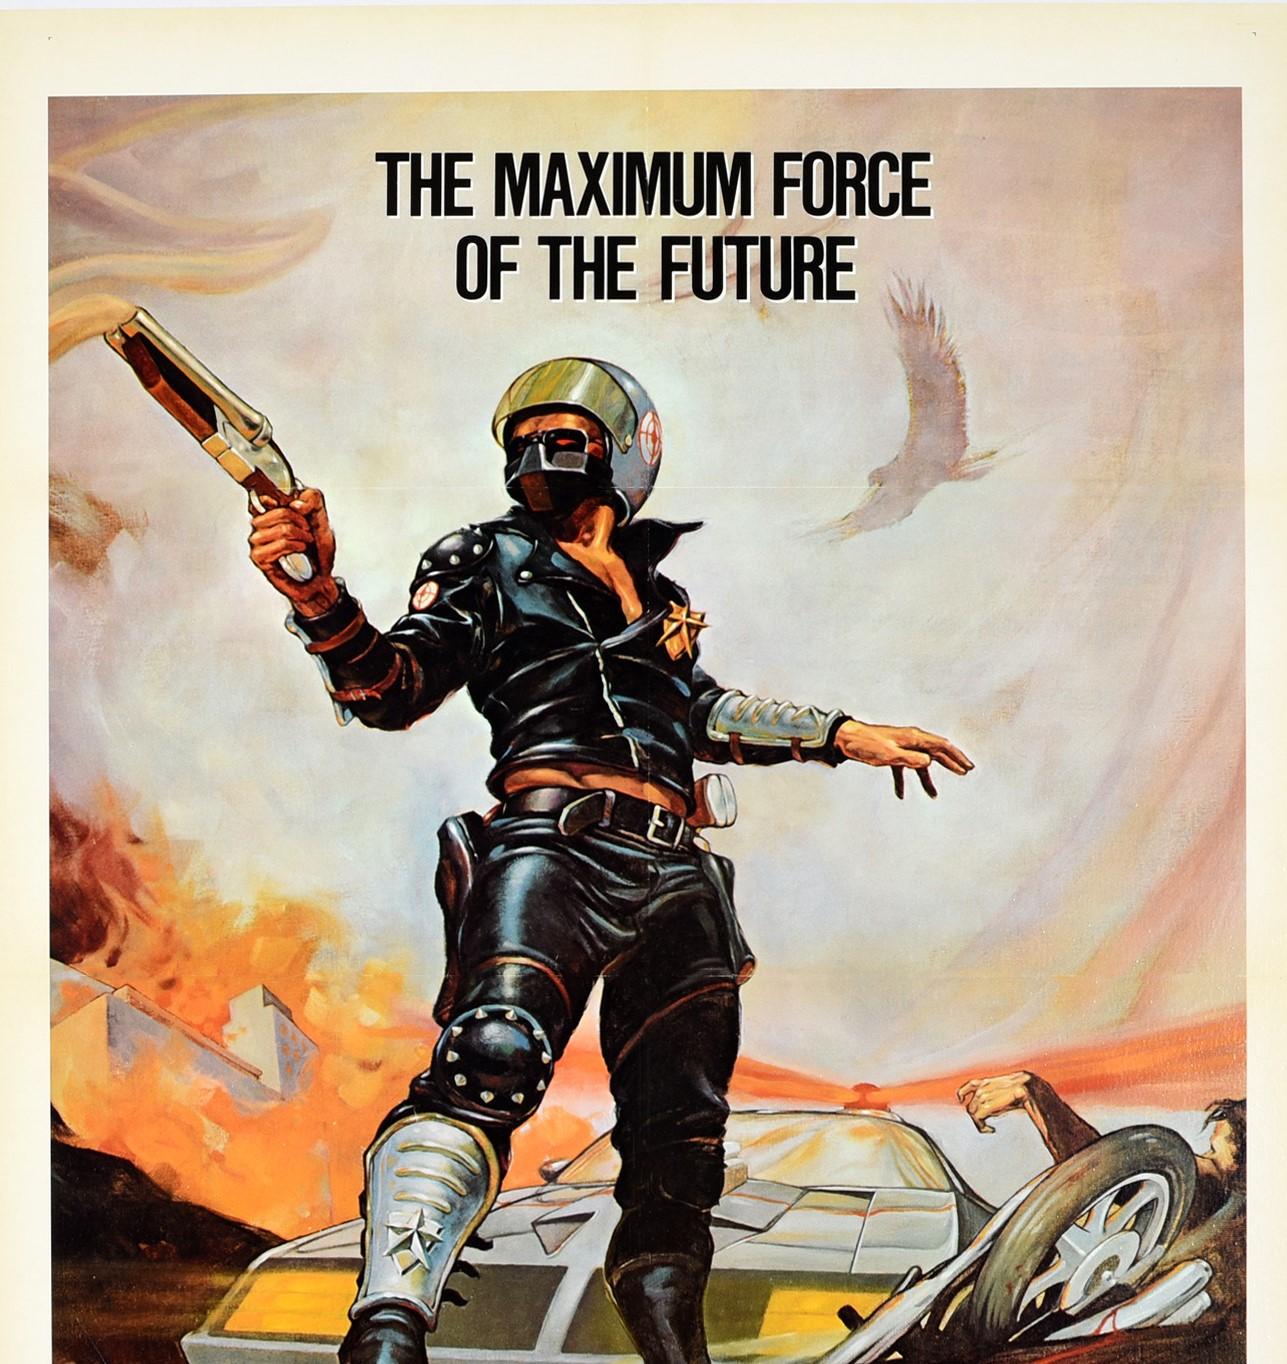 Original Vintage Poster For Mad Max Cult Movie Futuristic Sci-Fi Film Mel Gibson - Print by Bill Garland